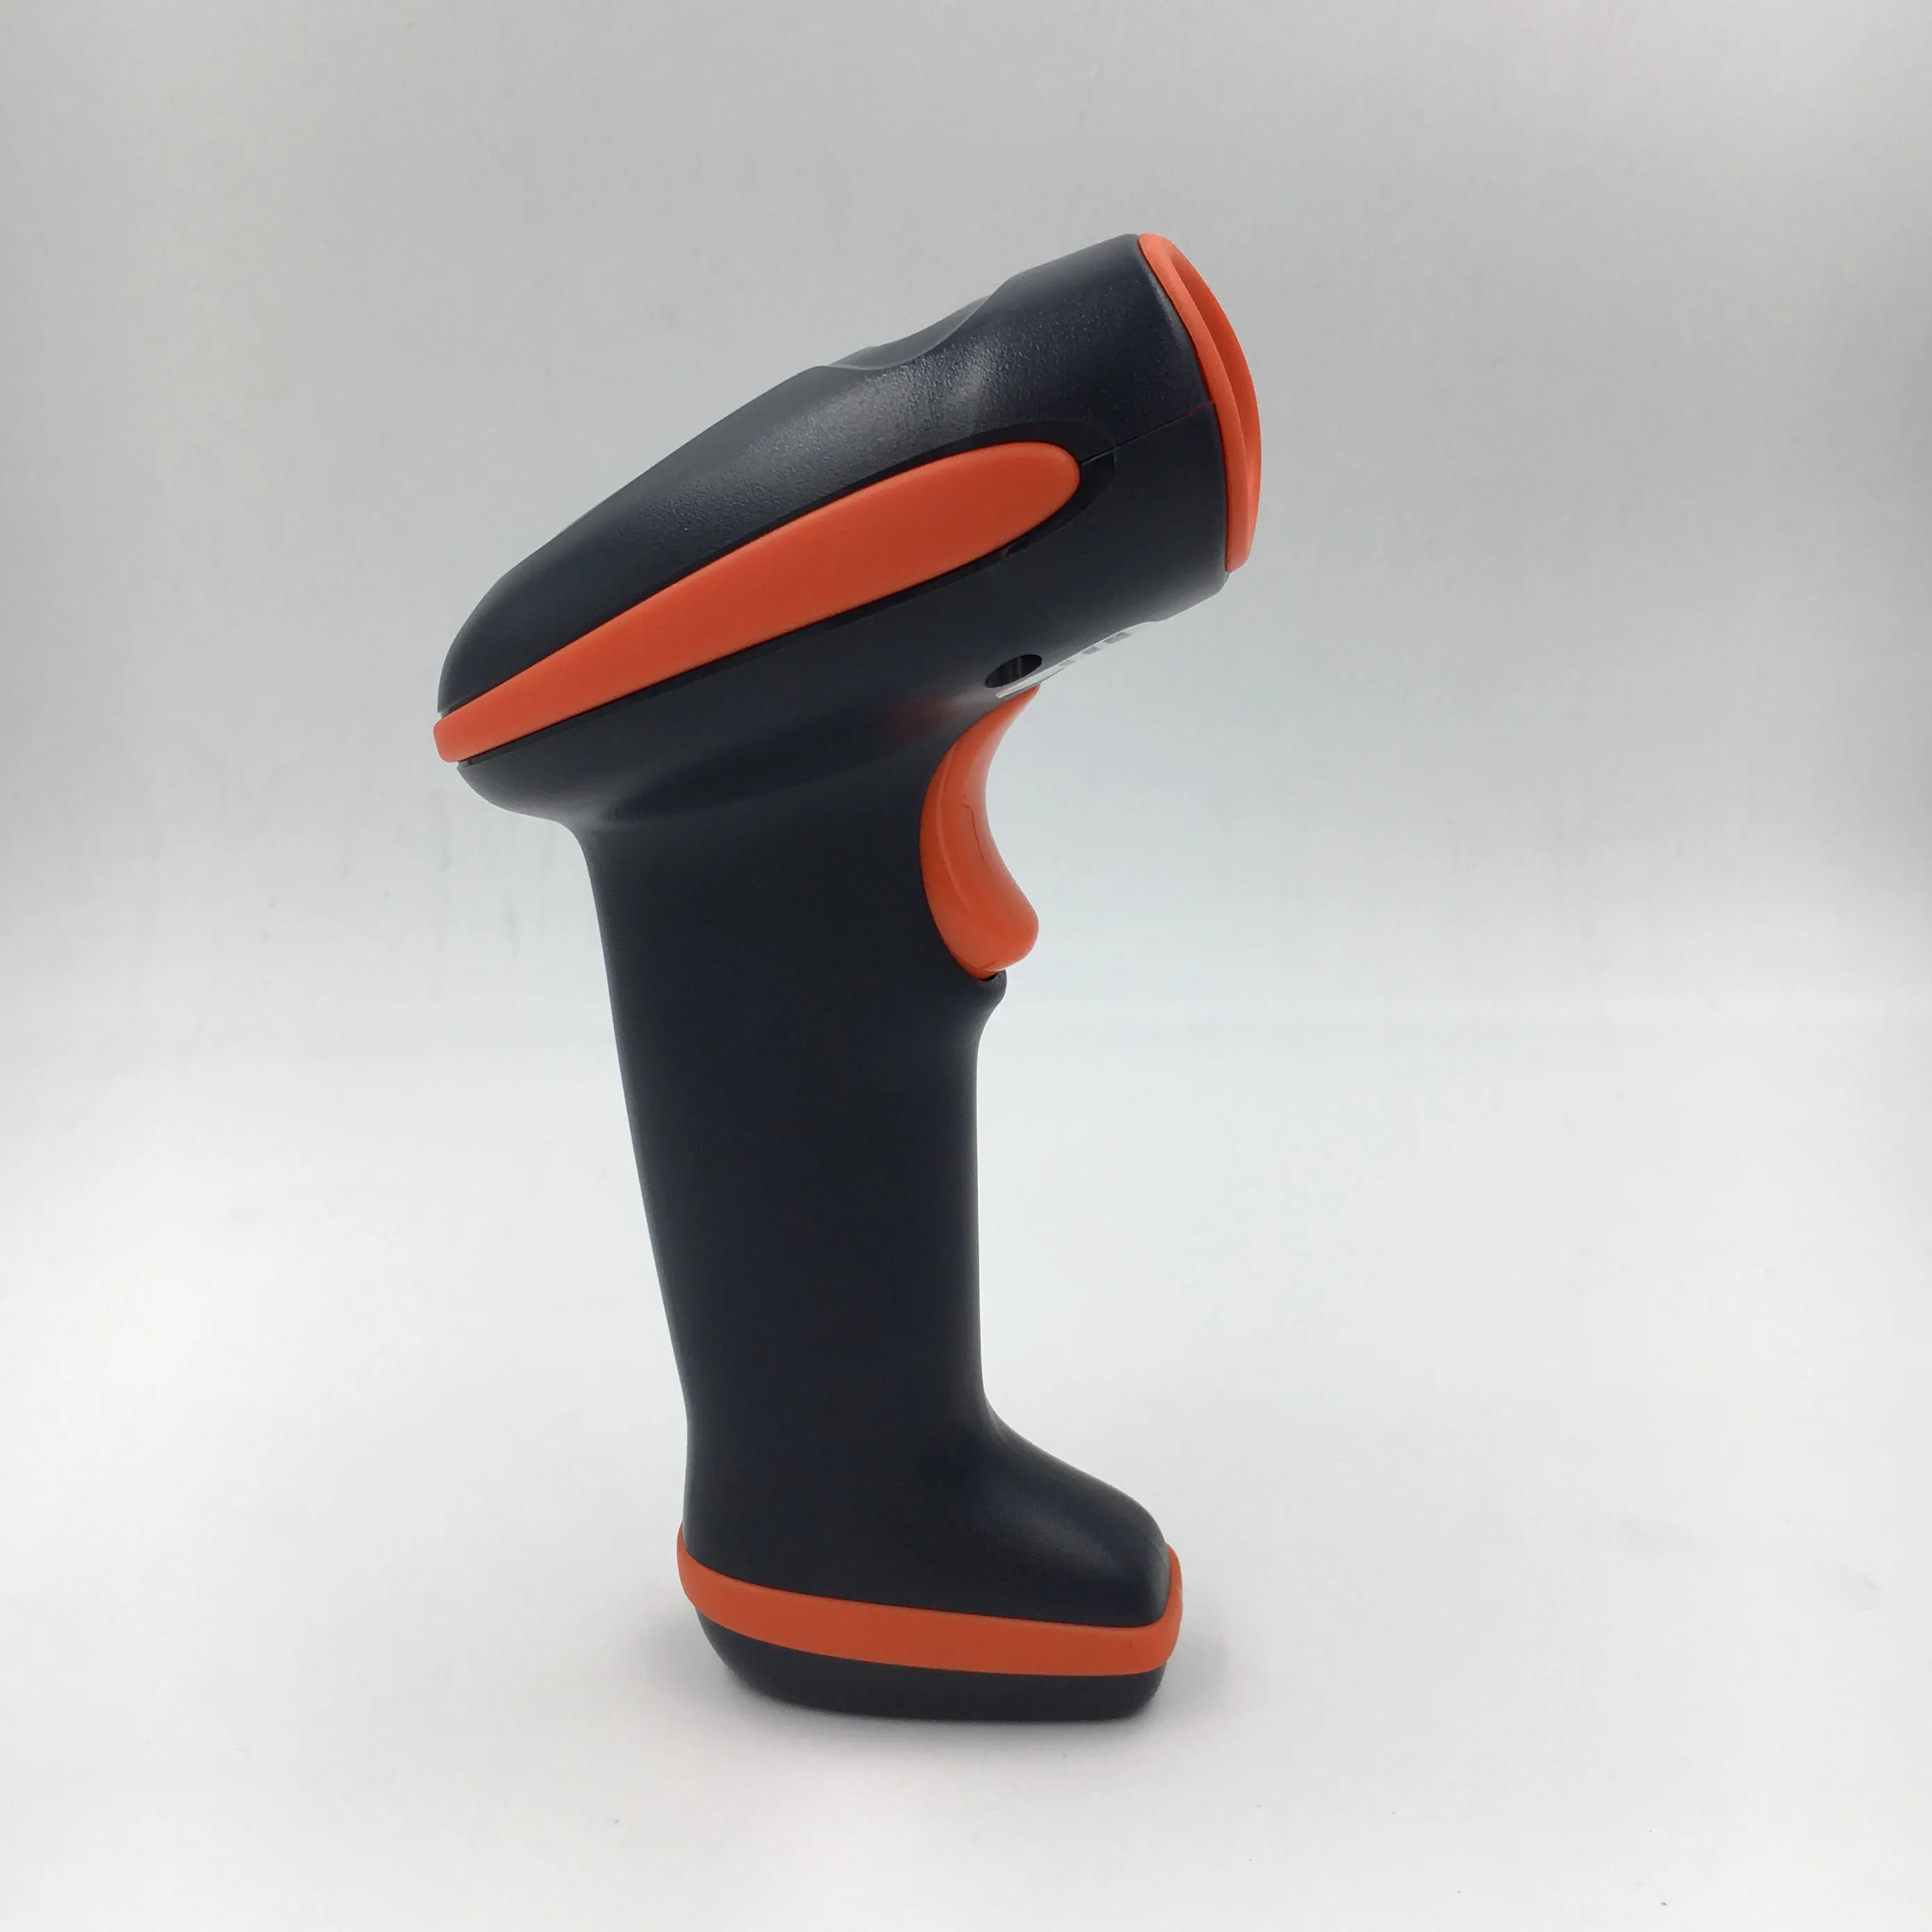 BSWNI-7030 POS terminal qr code scanner usb rs232 optional 2d barcode scanner